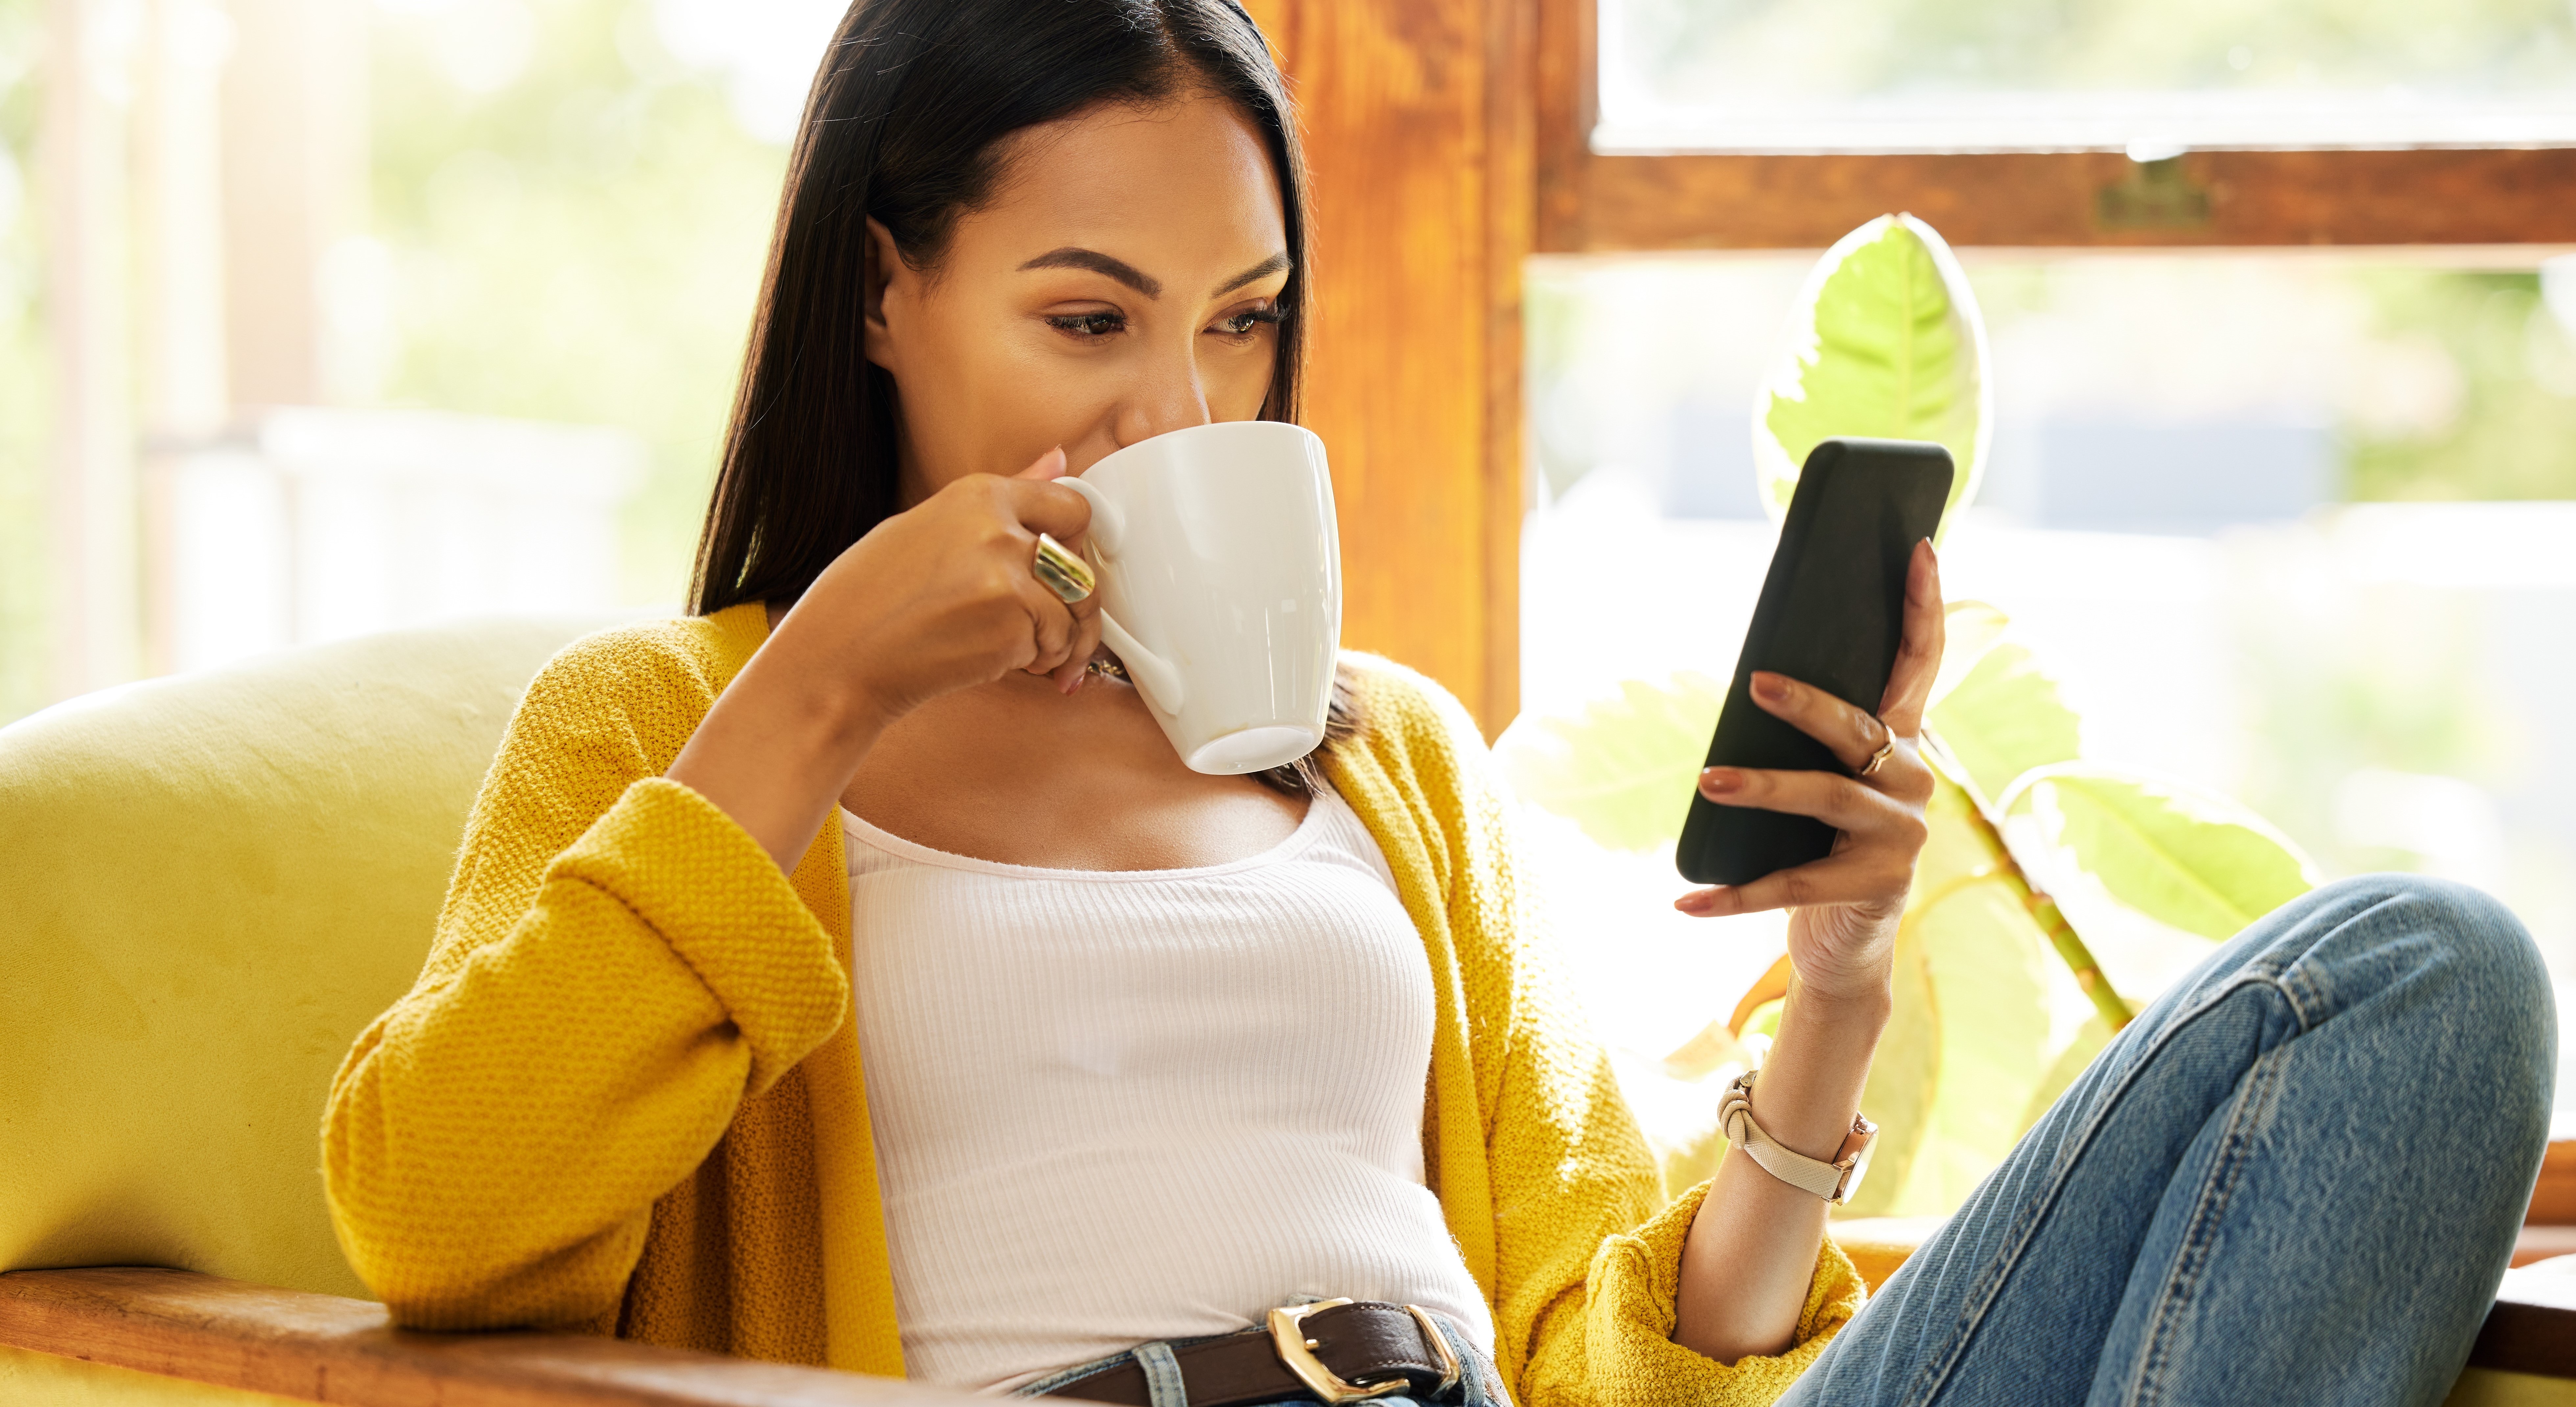 Woman drinking from a mug and looking at her mobile phone